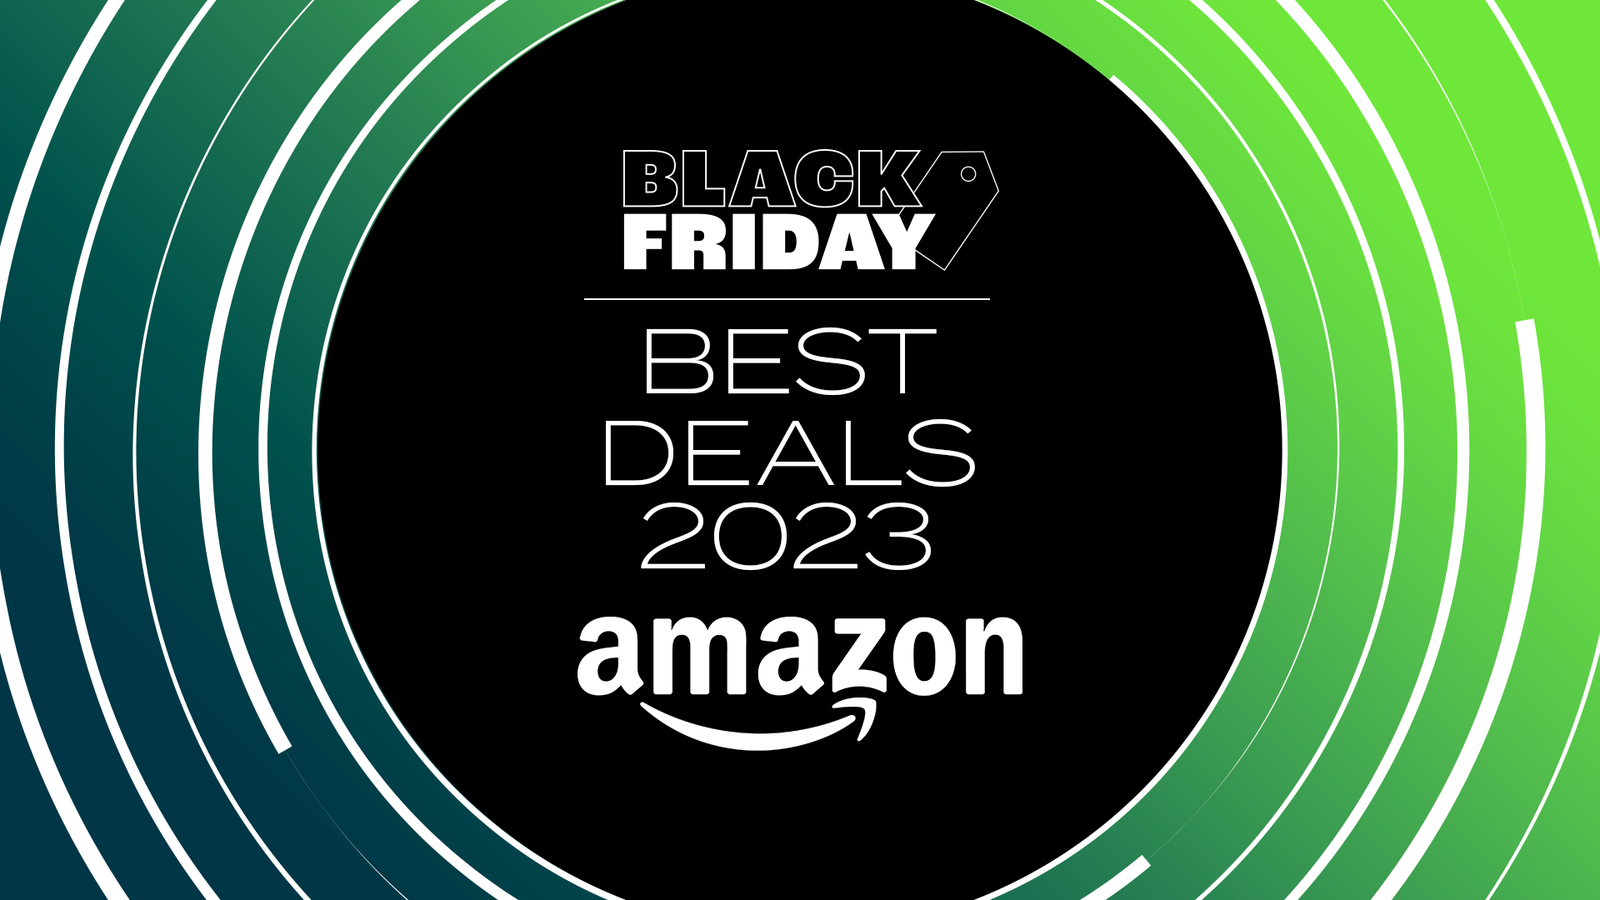 https://assetsio.reedpopcdn.com/Black-Friday-Amazon-gaming-deals-2023.png?width=1600&height=900&fit=crop&quality=100&format=png&enable=upscale&auto=webp